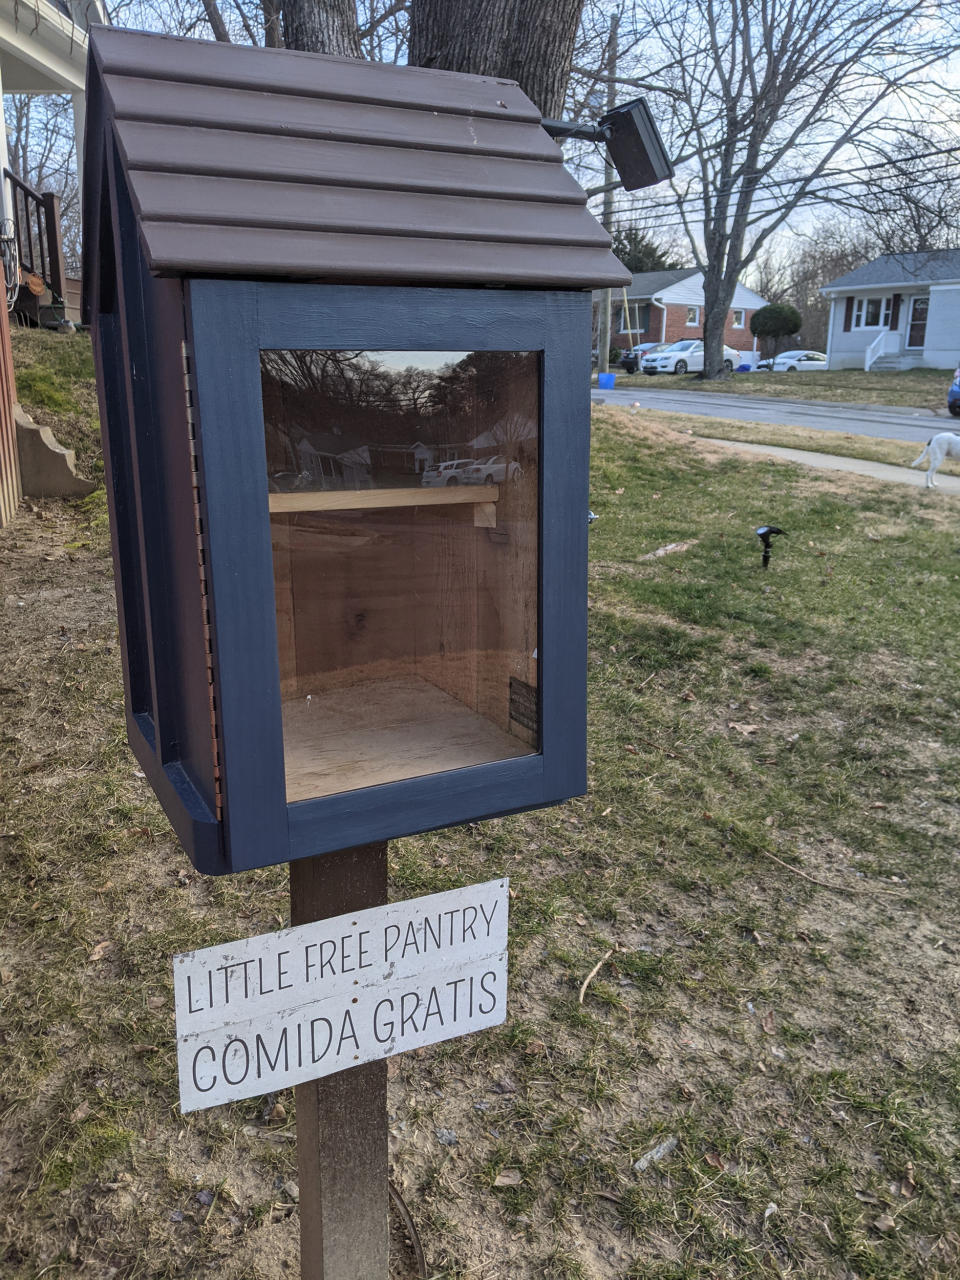 Headlee said that she used a Little Free Library structure to establish a private food pantry.  (Celeste Headlee)